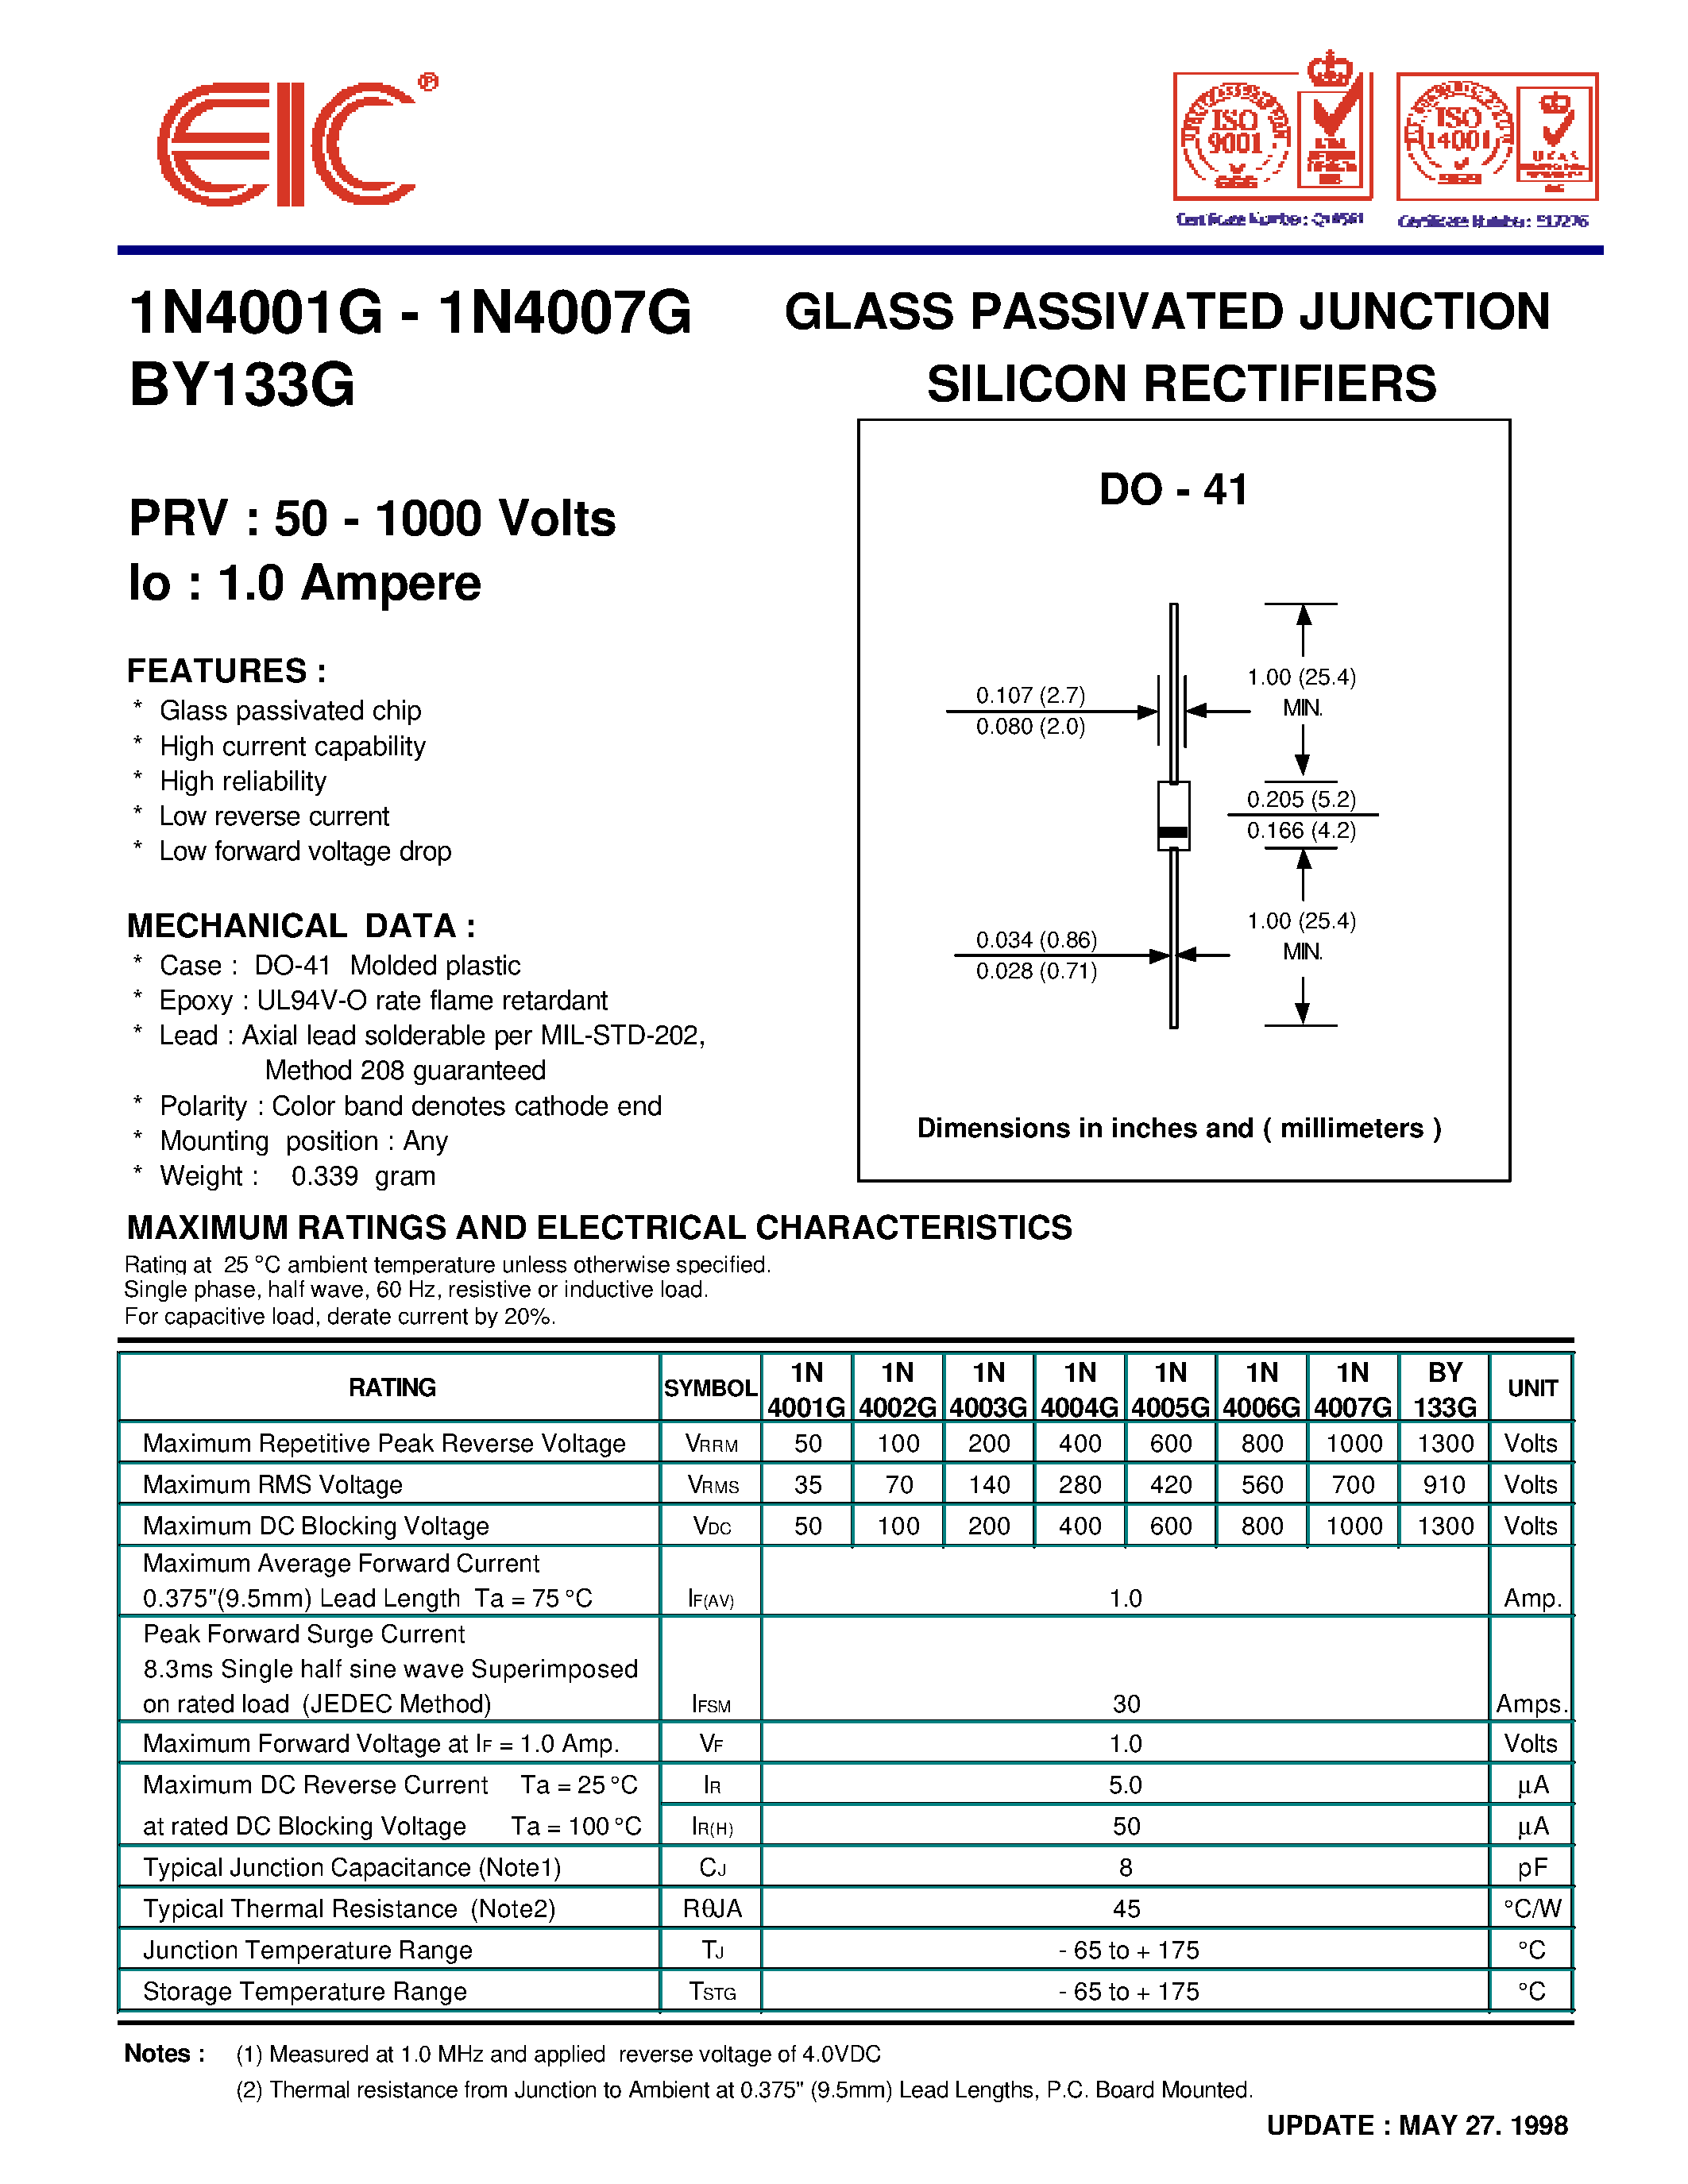 Datasheet BY133G - GLASS PASSIVATED JUNCTION SILICON RECTIFIERS page 1